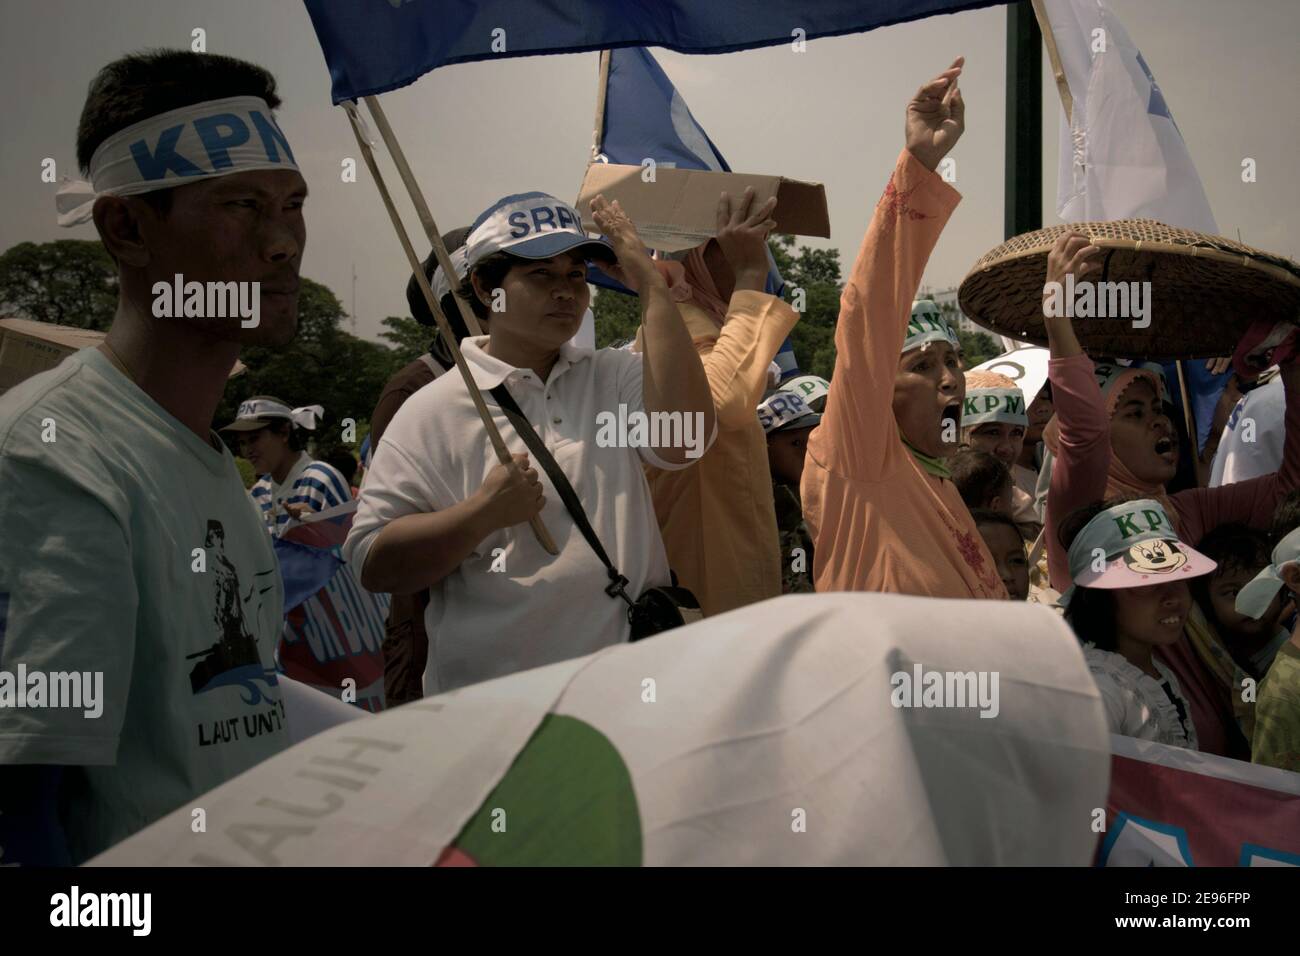 Fishermen's families expressing their supports to an oration held in protest against Indonesian government's plan to increase the retail prices of subsidized fuels. Central Jakarta, Jakarta, Indonesia.  Archival photo (2008). Stock Photo